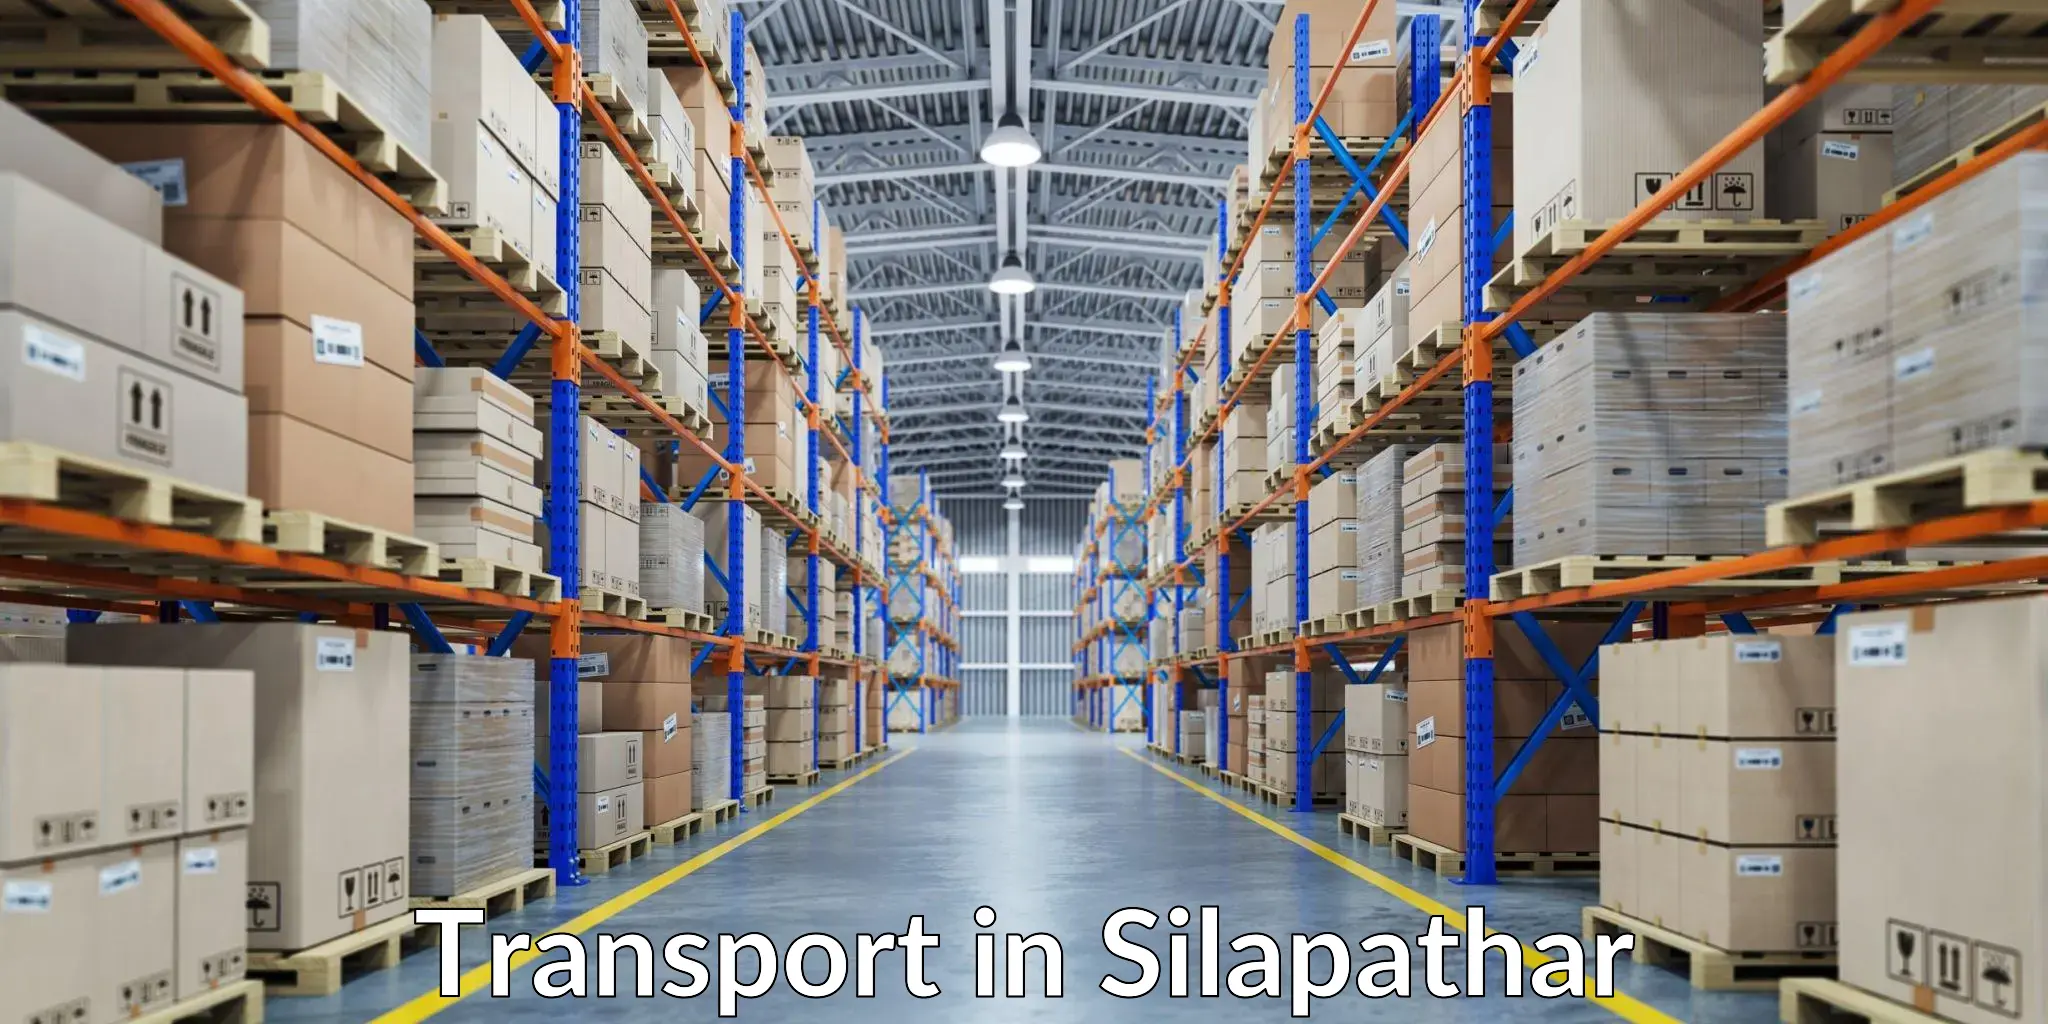 Furniture transport service in Silapathar